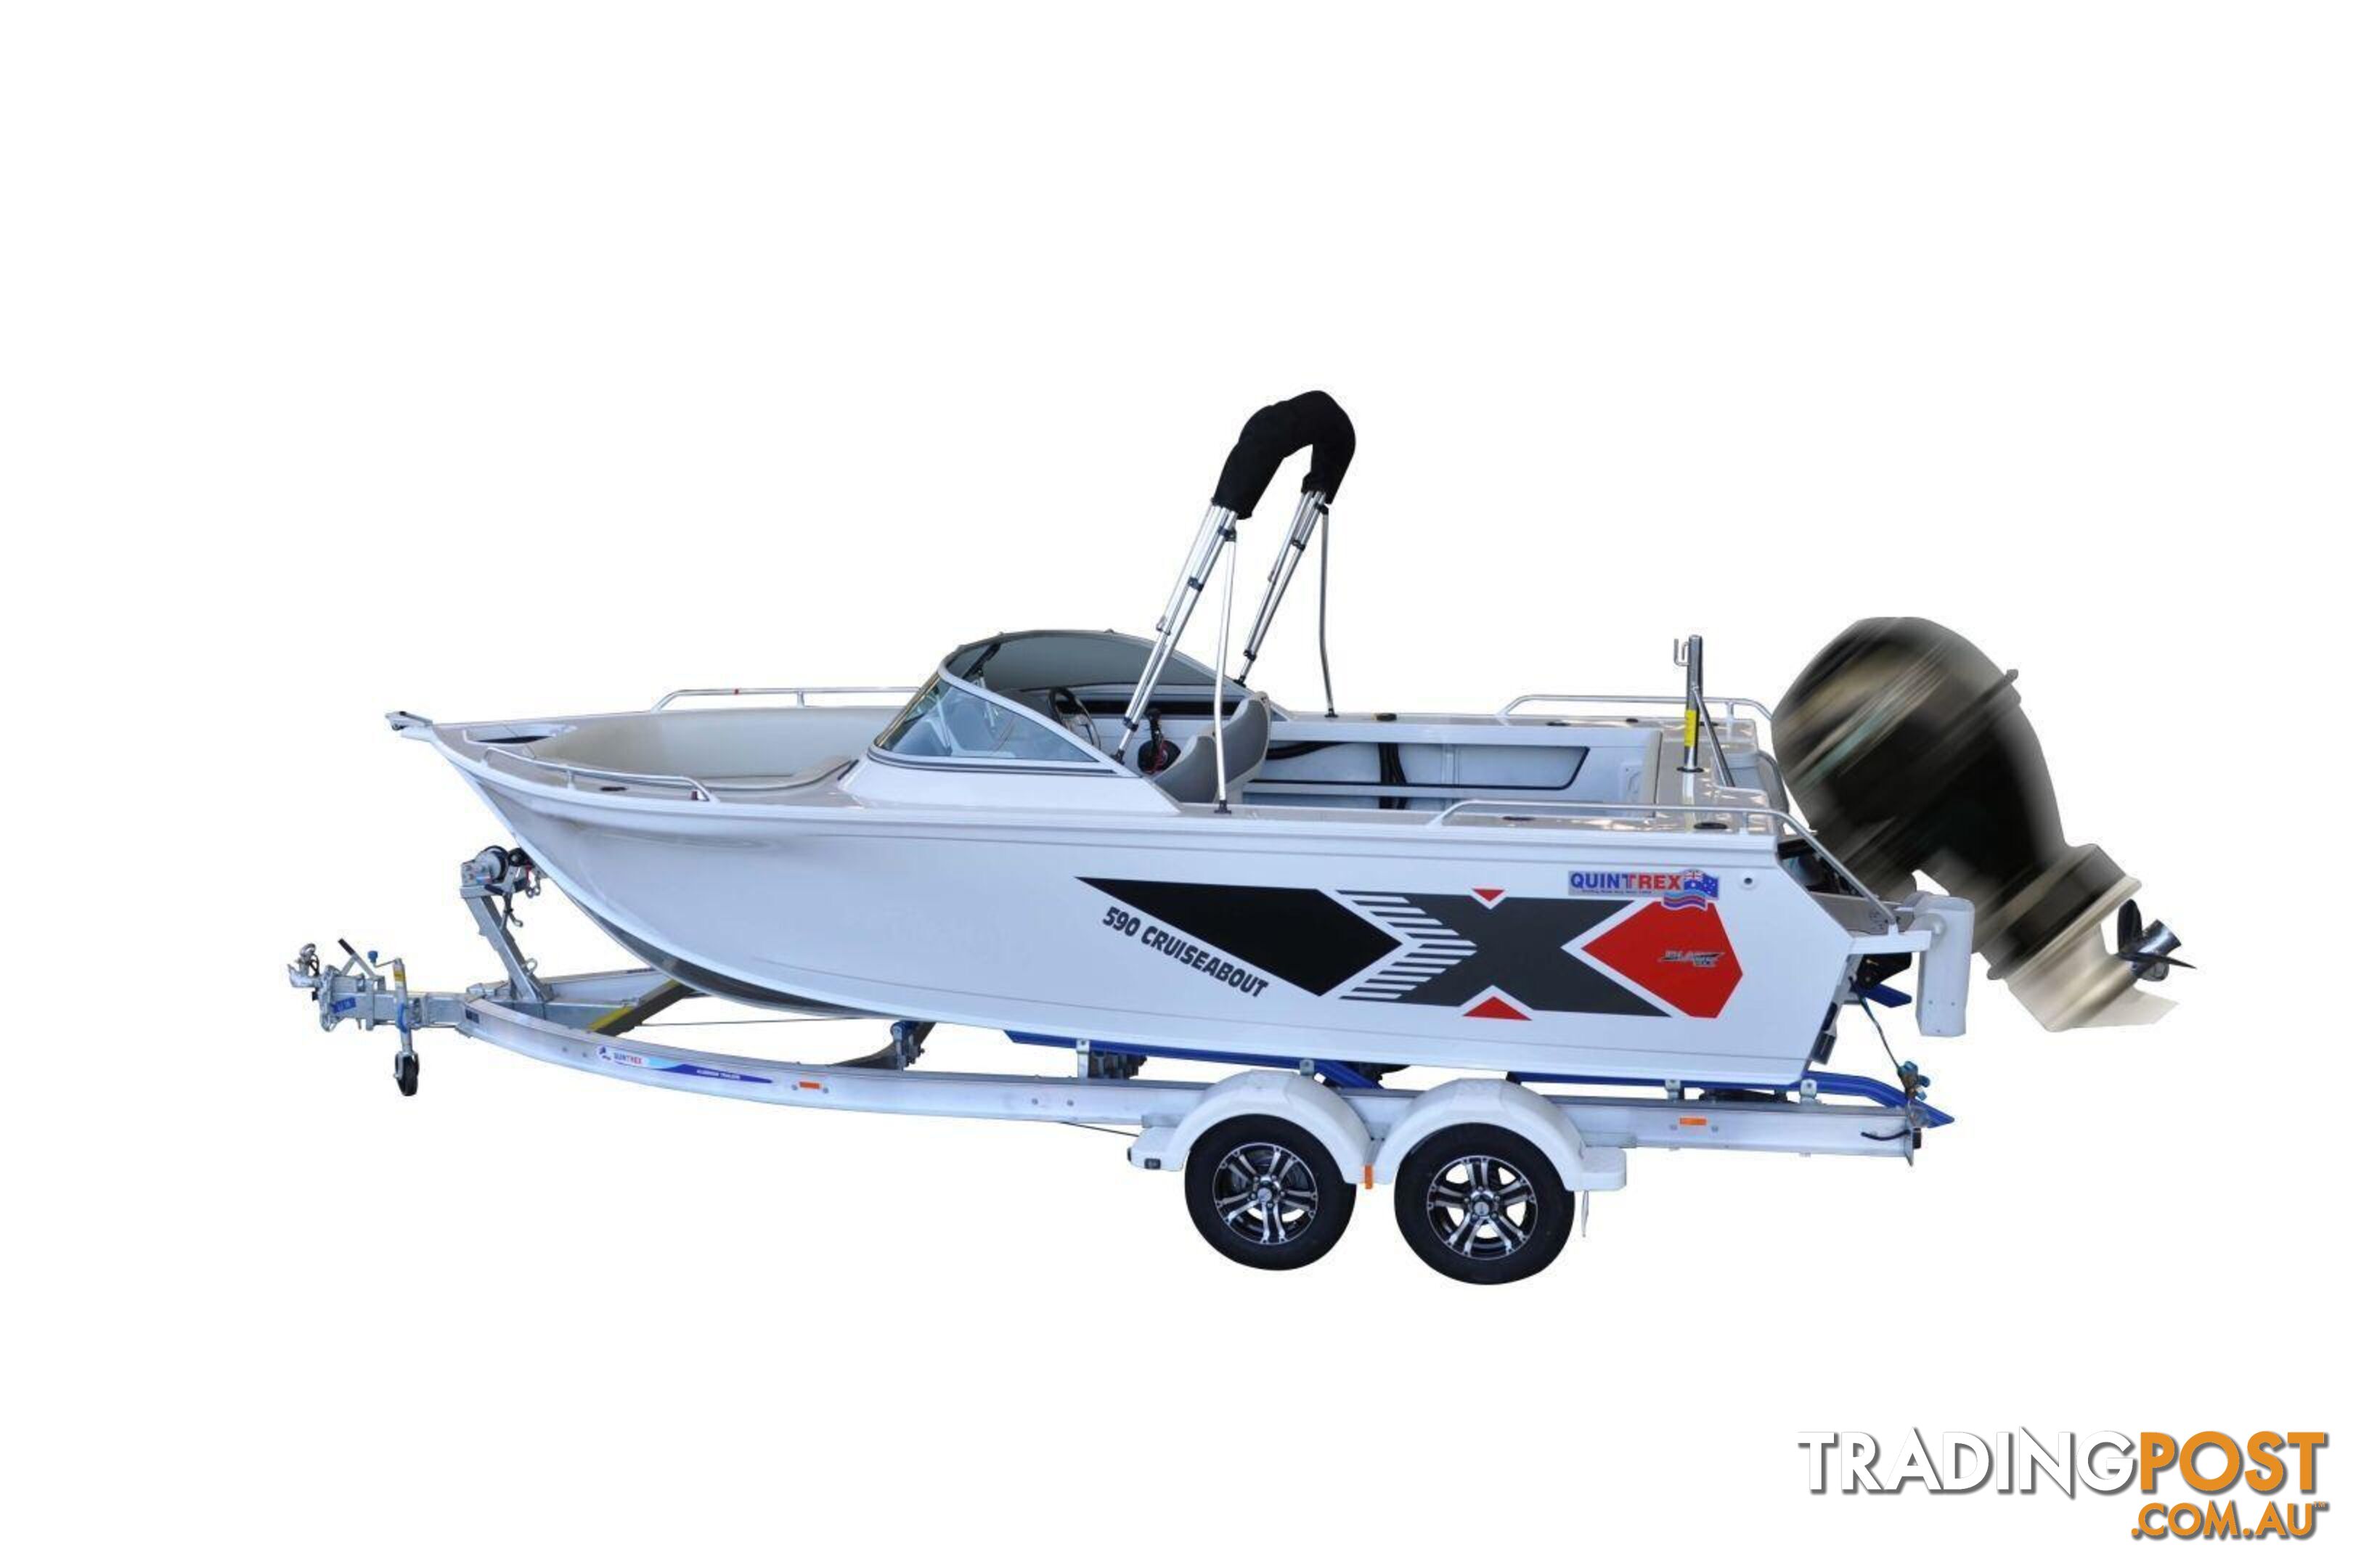 Quintrex 590 Cruiseabout + Yamaha F150hp 4-Stroke - Pack 1 for sale online prices